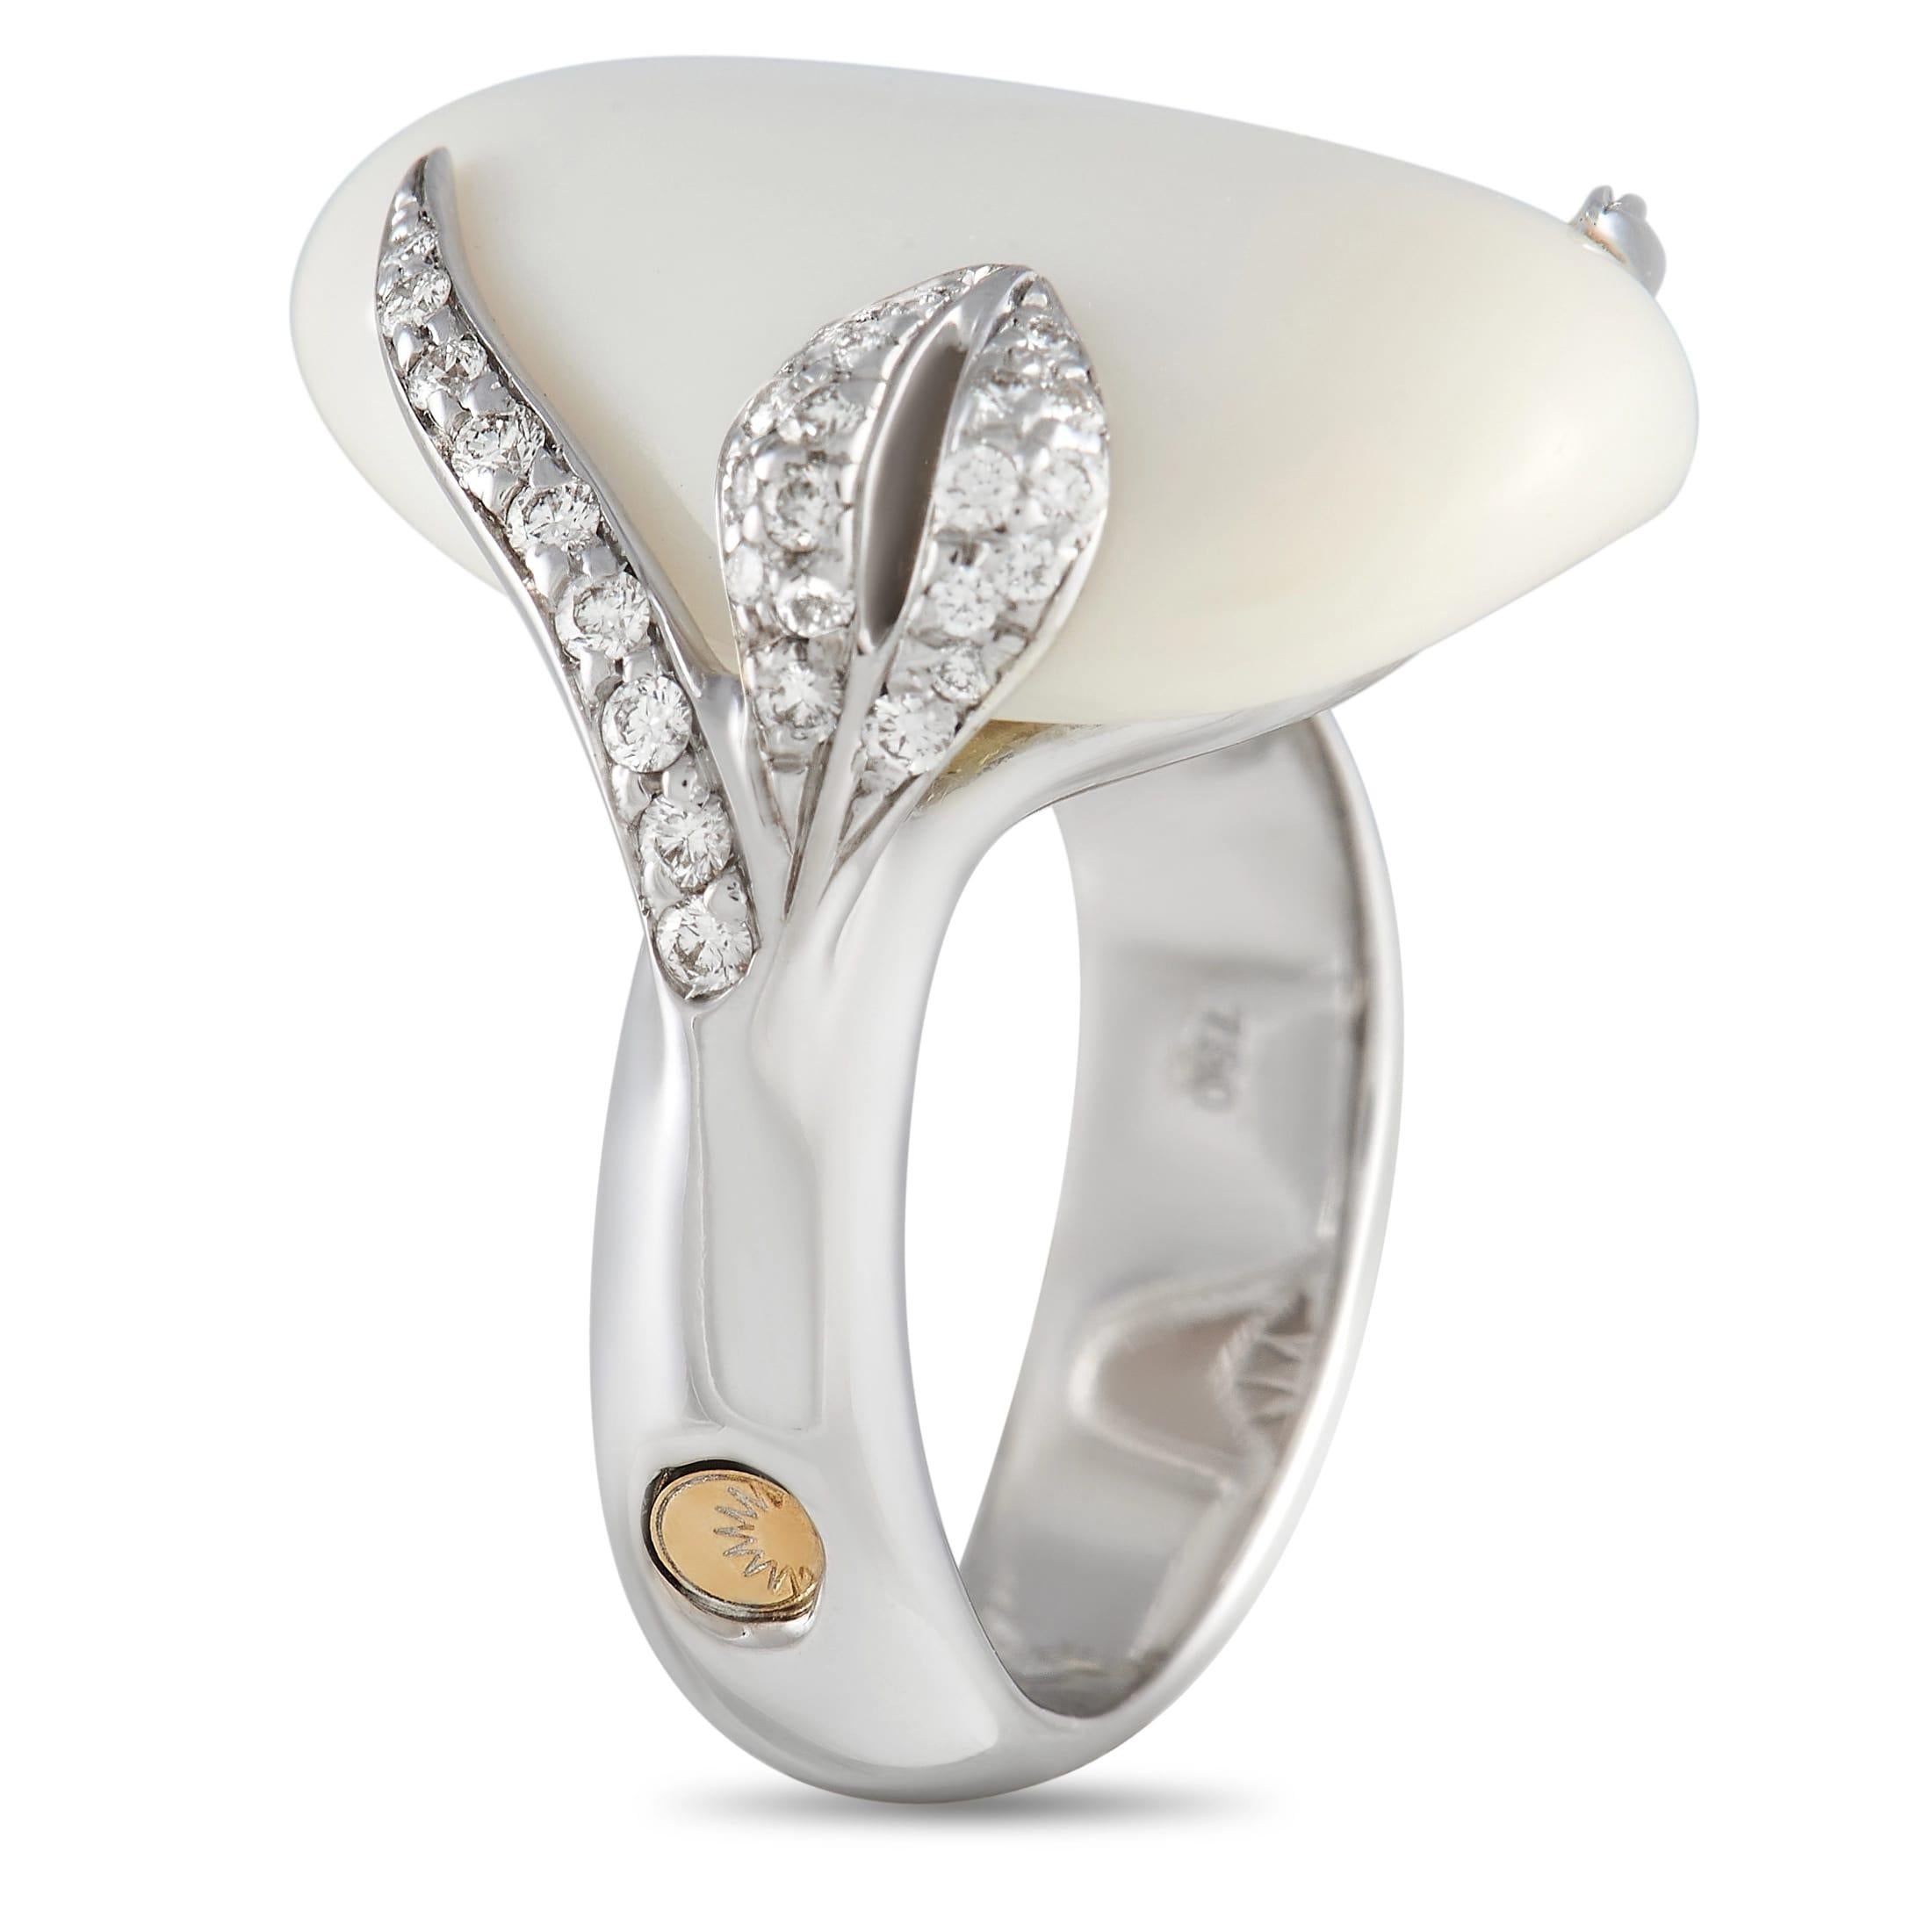 Feminine elegance defines this Luca Carati ring. This piece that is handmade in Italy features a 5mm band in 18K white gold topped with a hypnotizing white agate. The milky white hard stone features smooth and rounded edges and a beautiful frame of